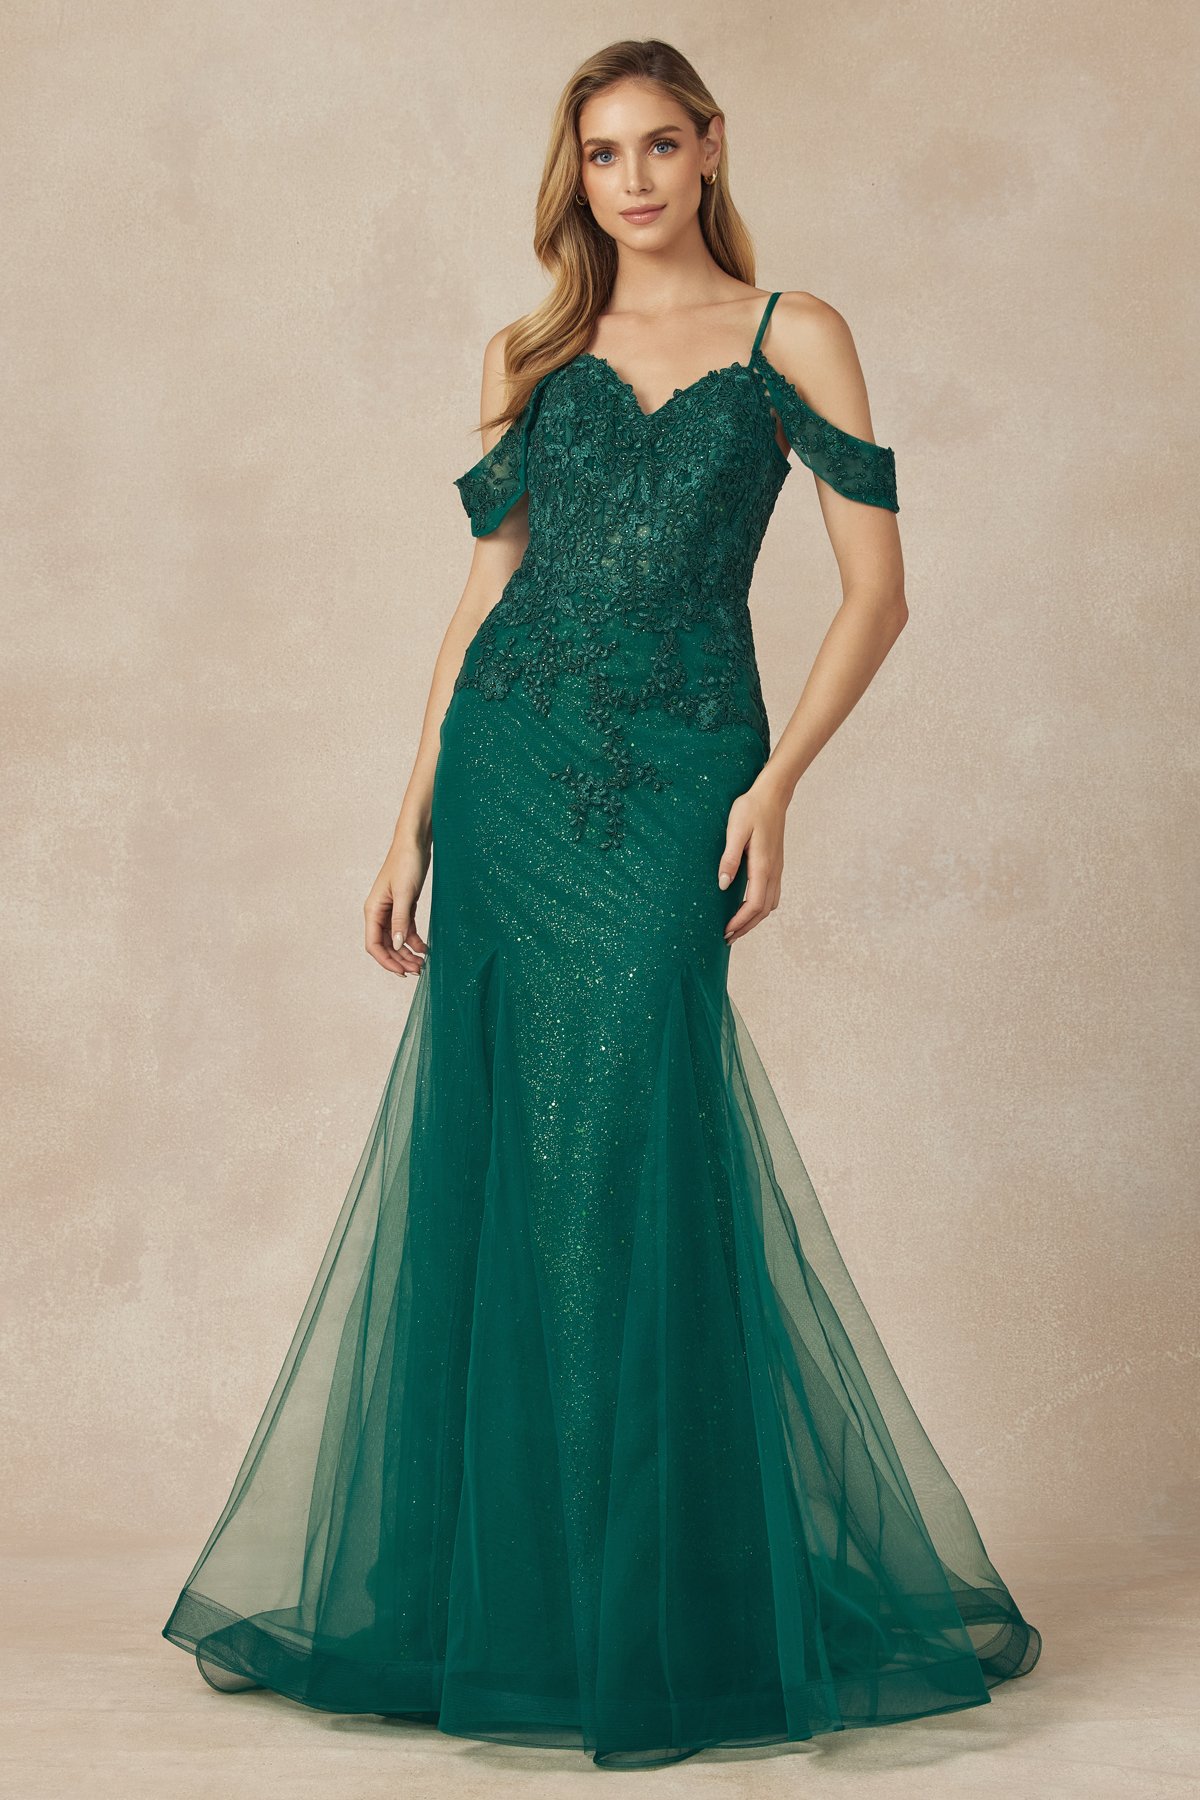 Emerald Green Long Sleeve Mermaid Prom Dress Beaded Tiered Pageant Gow –  Viniodress